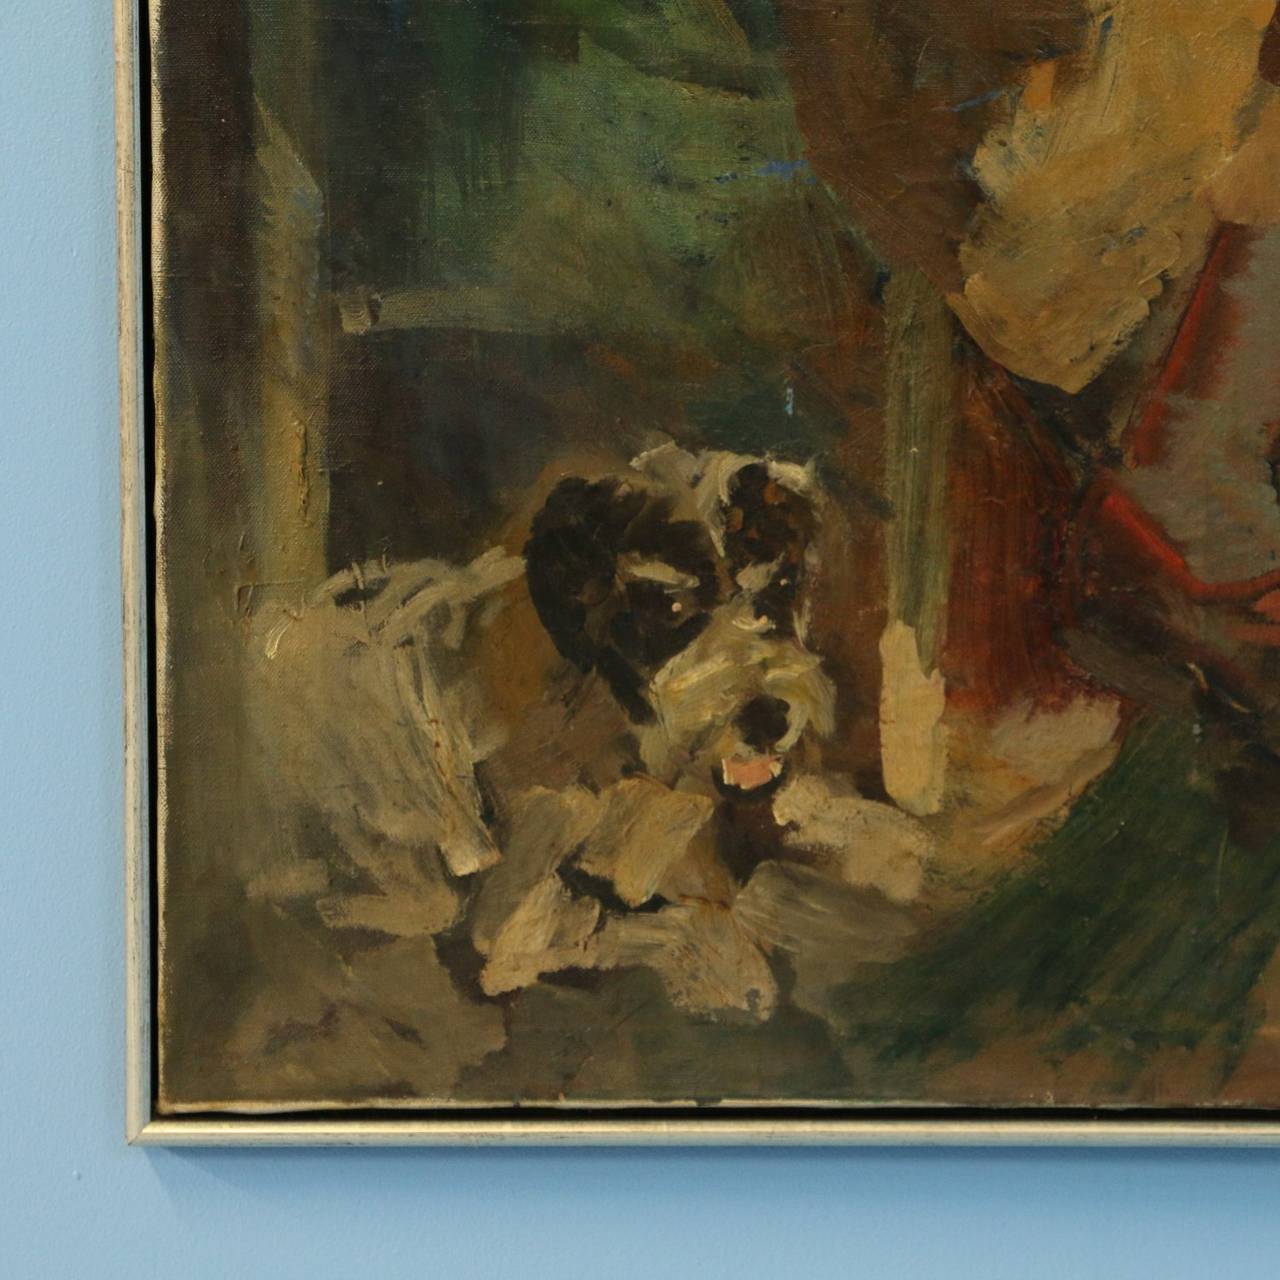 Interior with boy and dog by Niels Hansen (1880-1946), oil on canvas, signed Niels Hansen and dated 1934. 

Close up photos coming soon. Please call or message us and we will be happy to email photos quickly.

Scandinavian Antiques imports